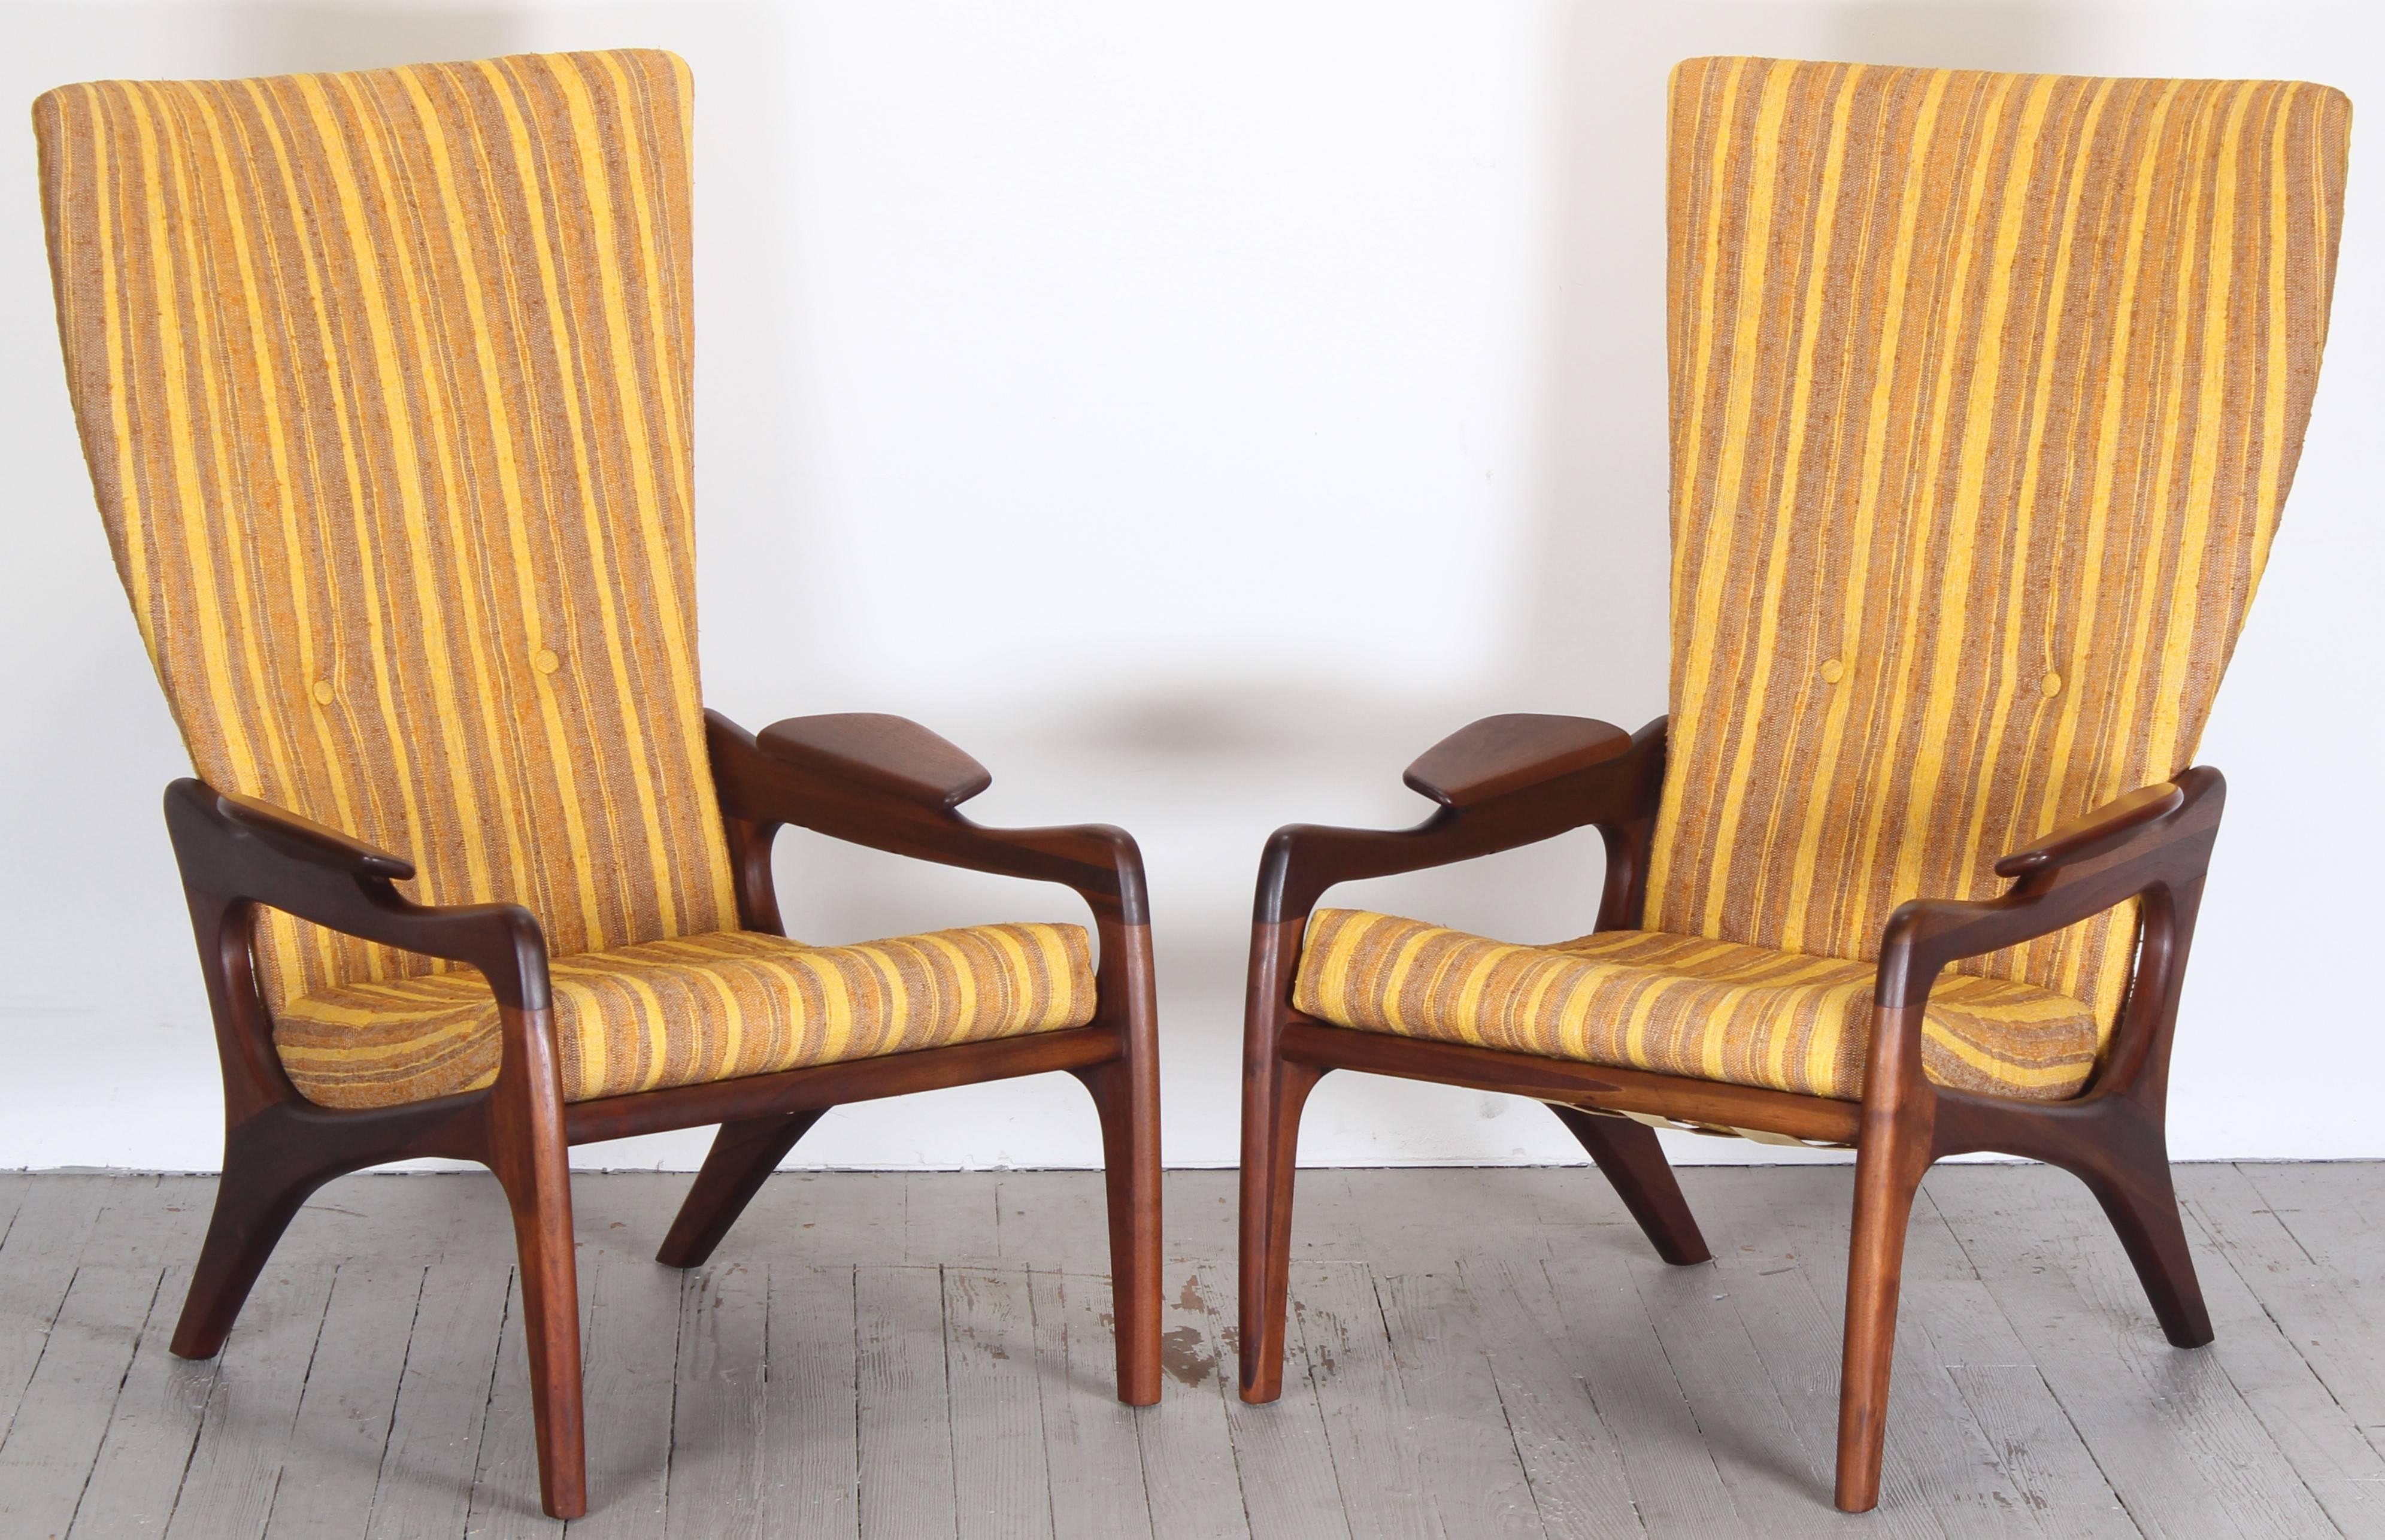 Pair of vintage sculptural wing back chairs designed by Adrian Pearsall for Craft Associates. These unique chairs are very comfortable. Walnut frames with original finish and upholstery.
The chairs need to be reupholstered. One cushion maintains